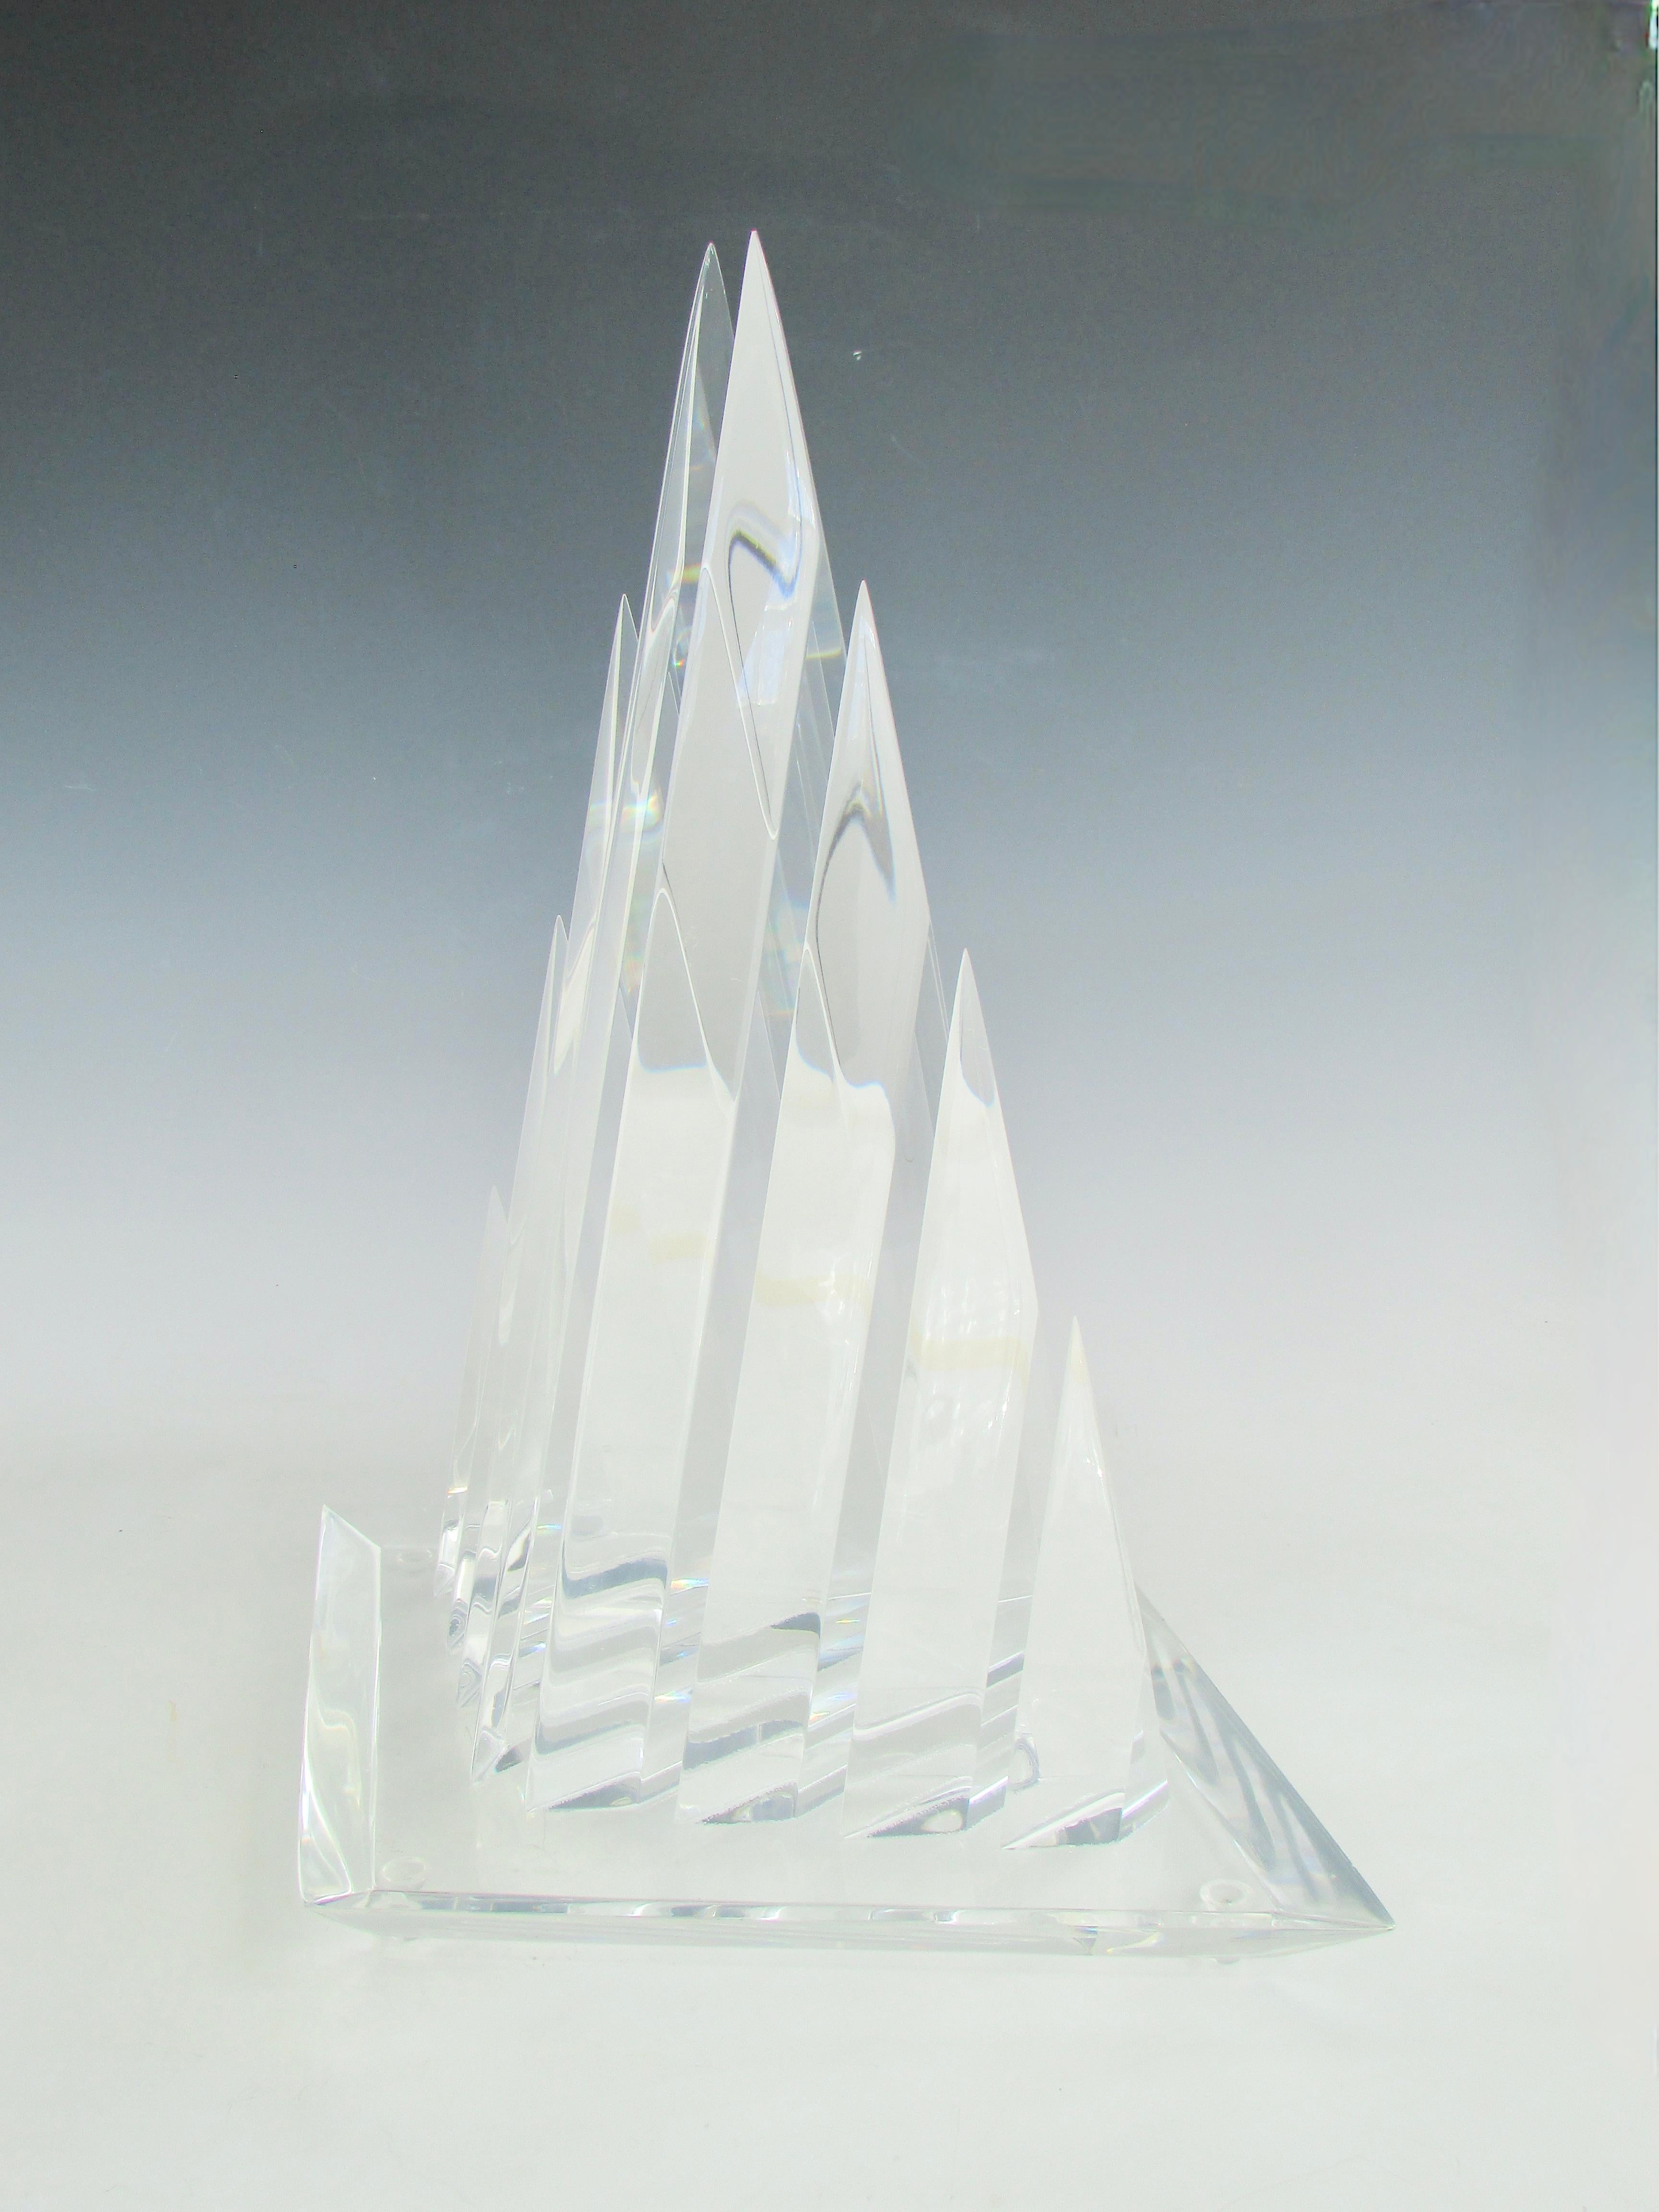 Hivo Van Teal Segmented Lucite Pyramid, Triangle Sculpture For Sale 1